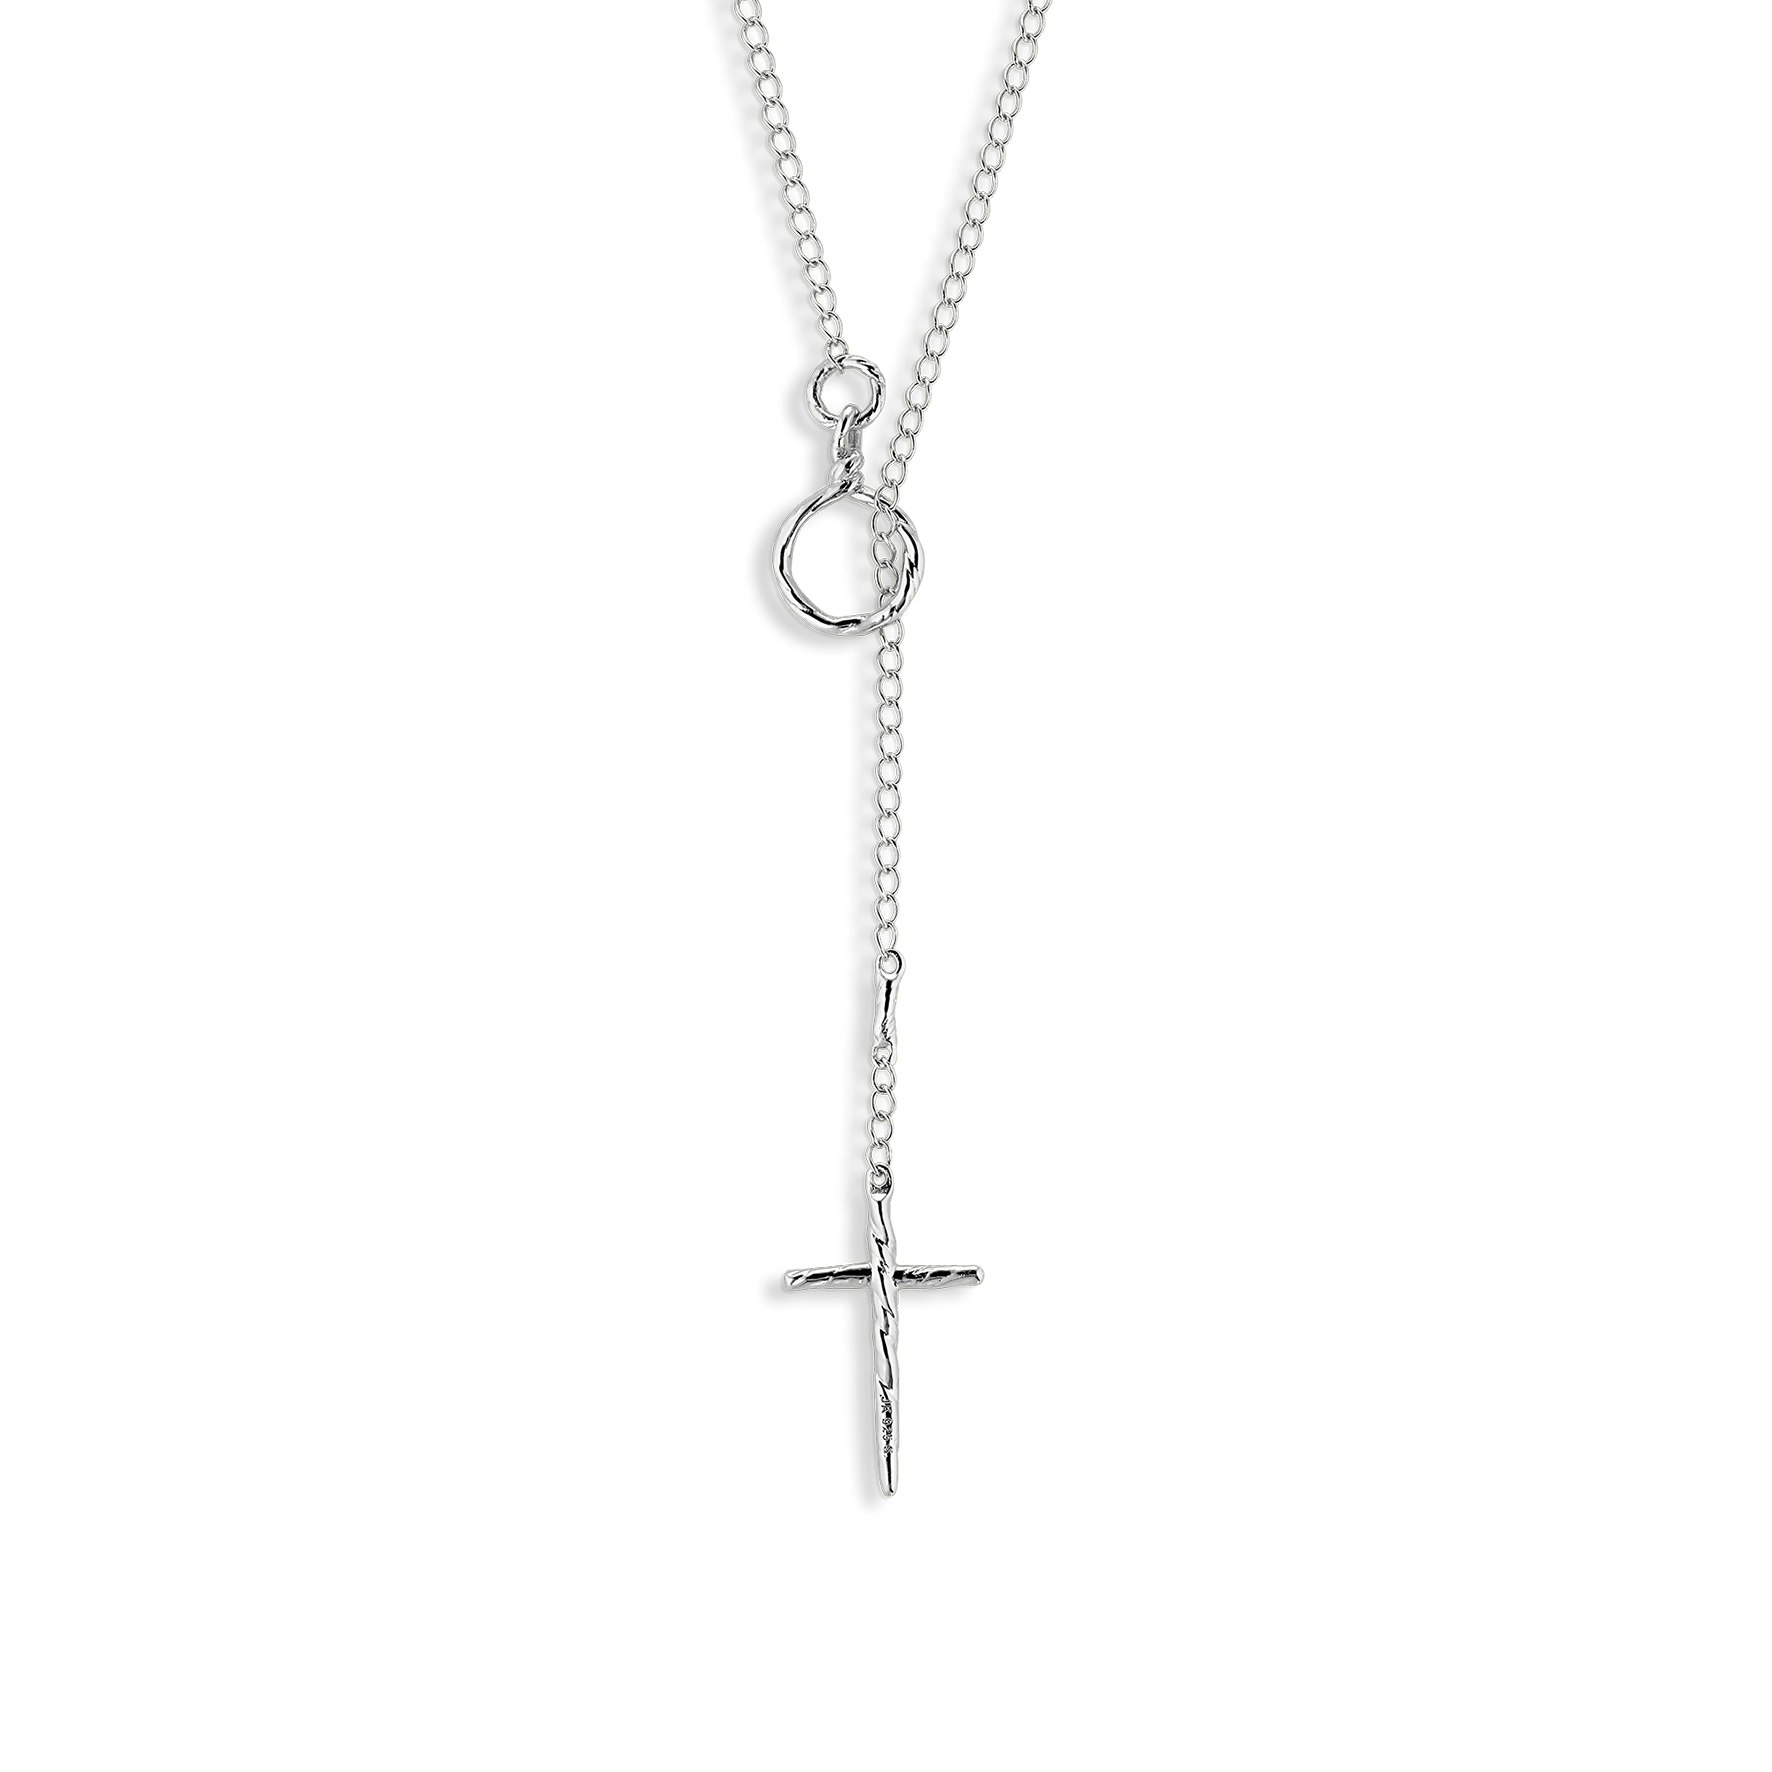 Toggle Cross Necklace from Jane Kønig in Silver Sterling 925